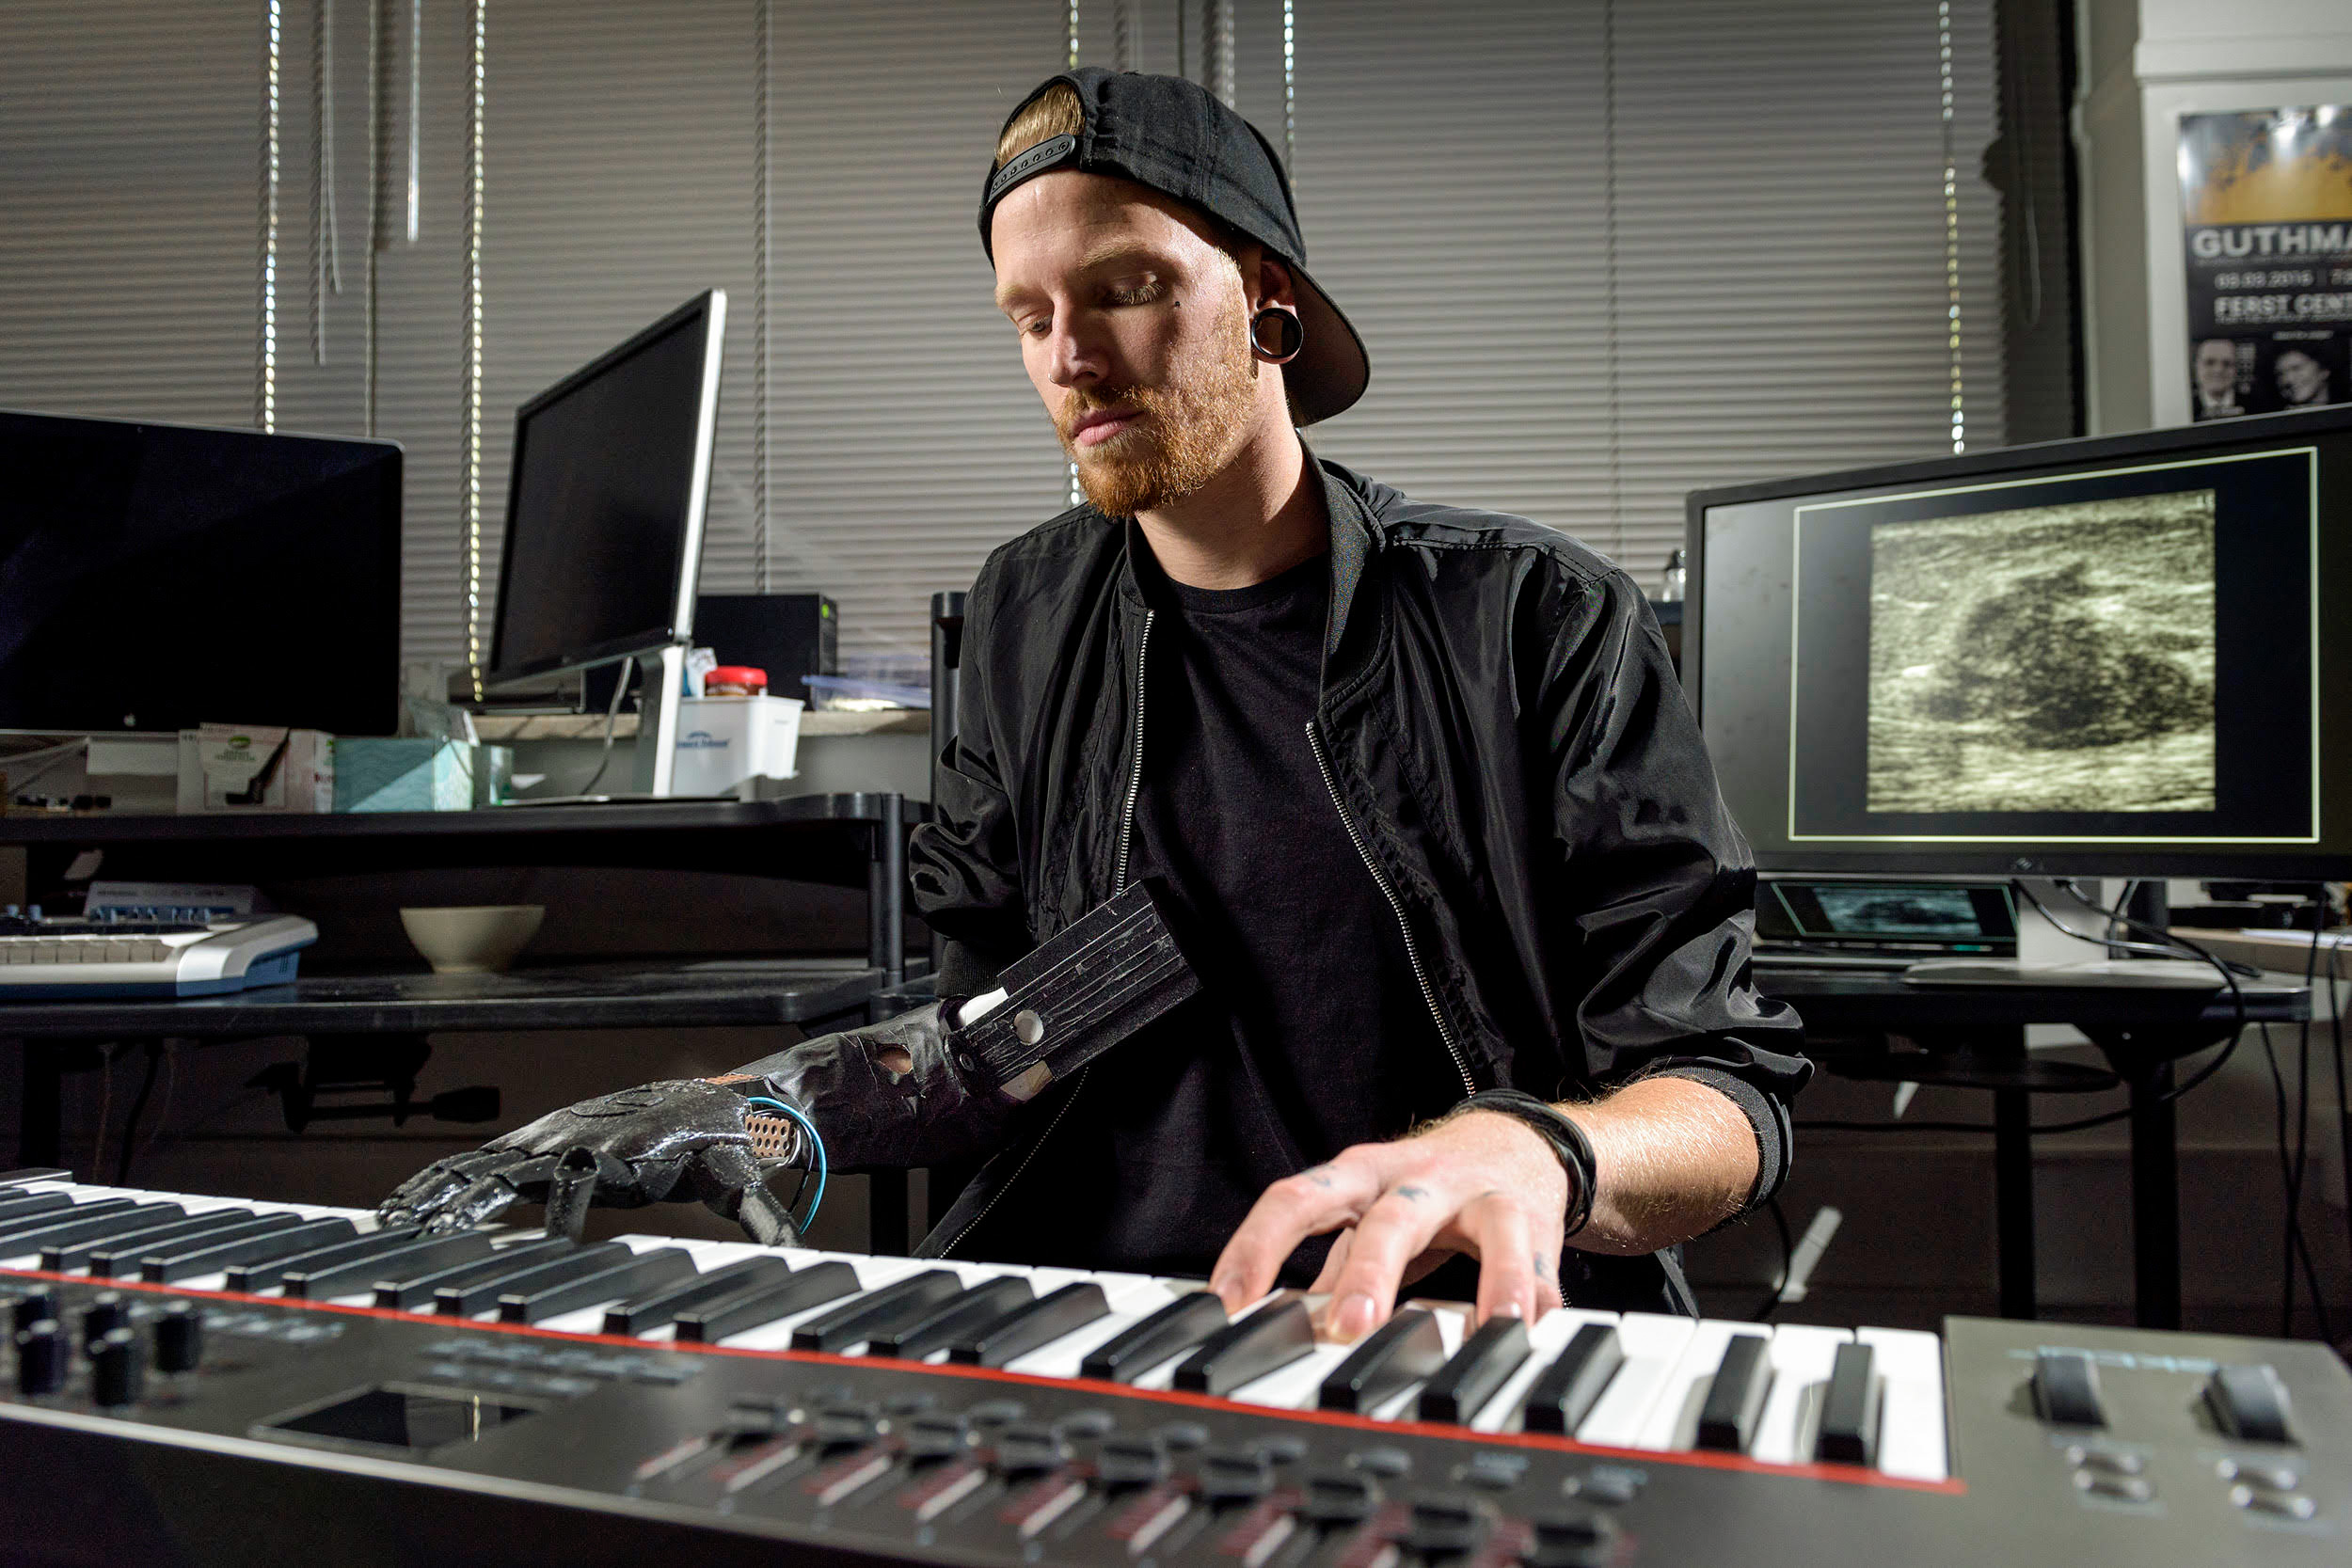 Barnes plays keyboard with prosthetic hand